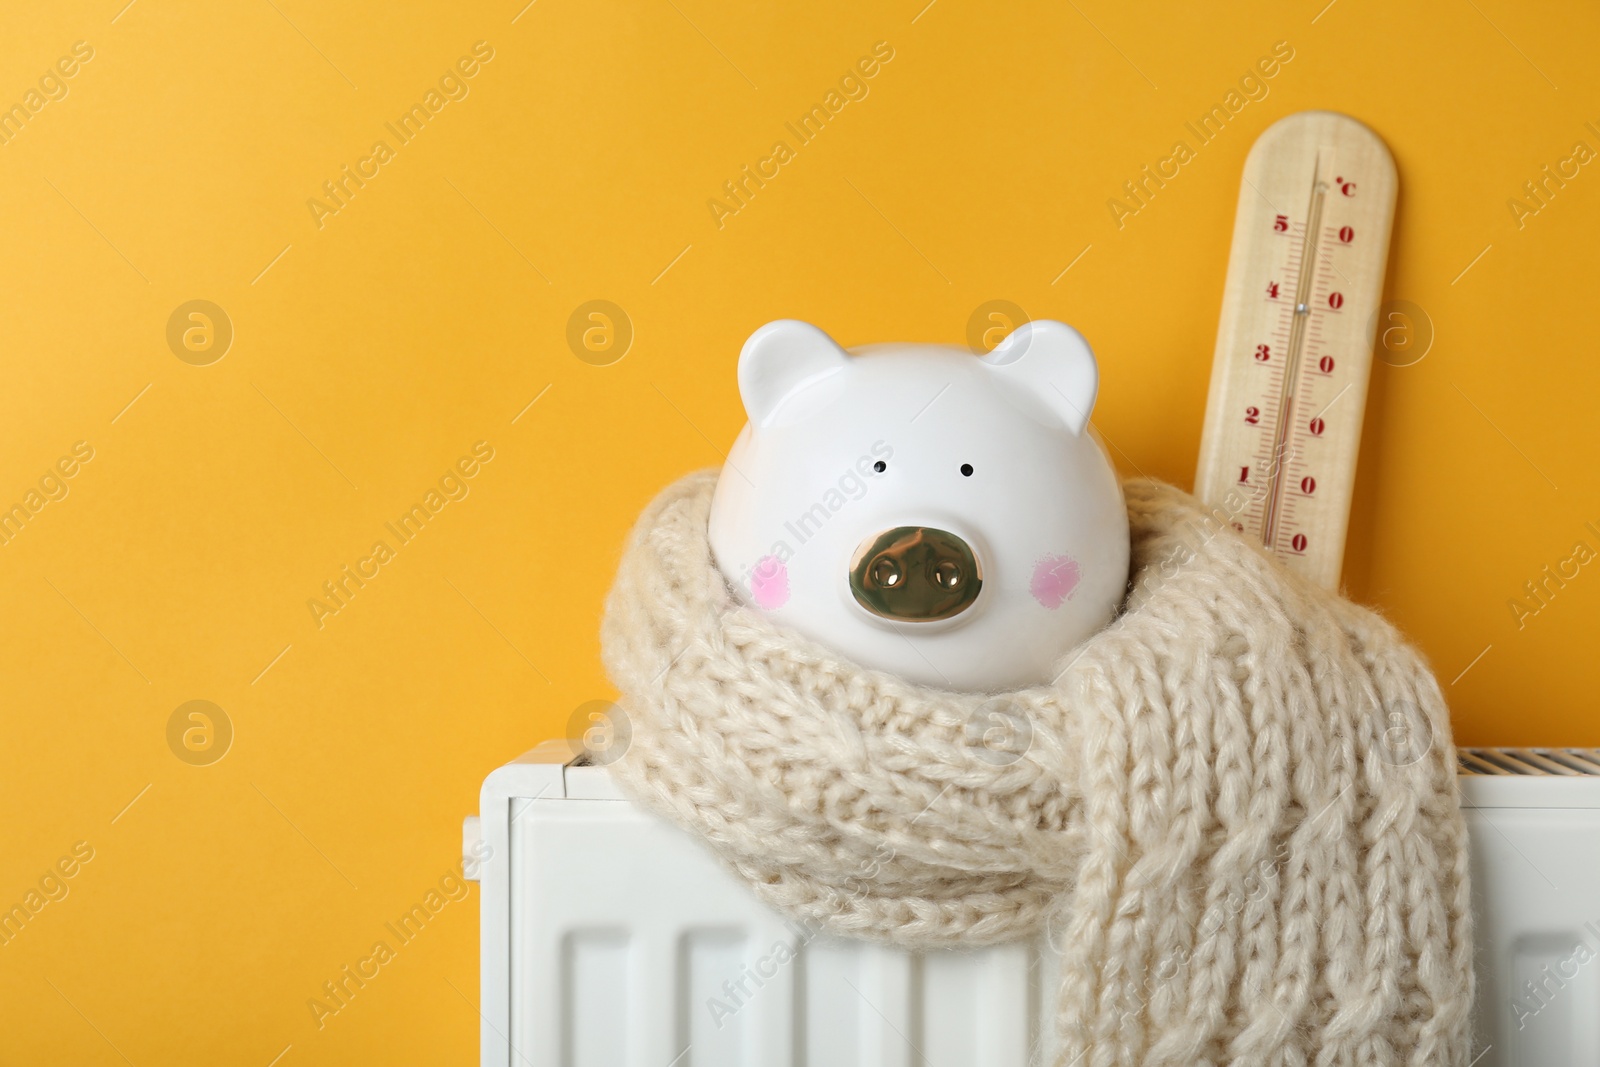 Photo of Piggy bank wrapped in scarf and thermometer on heating radiator against orange background